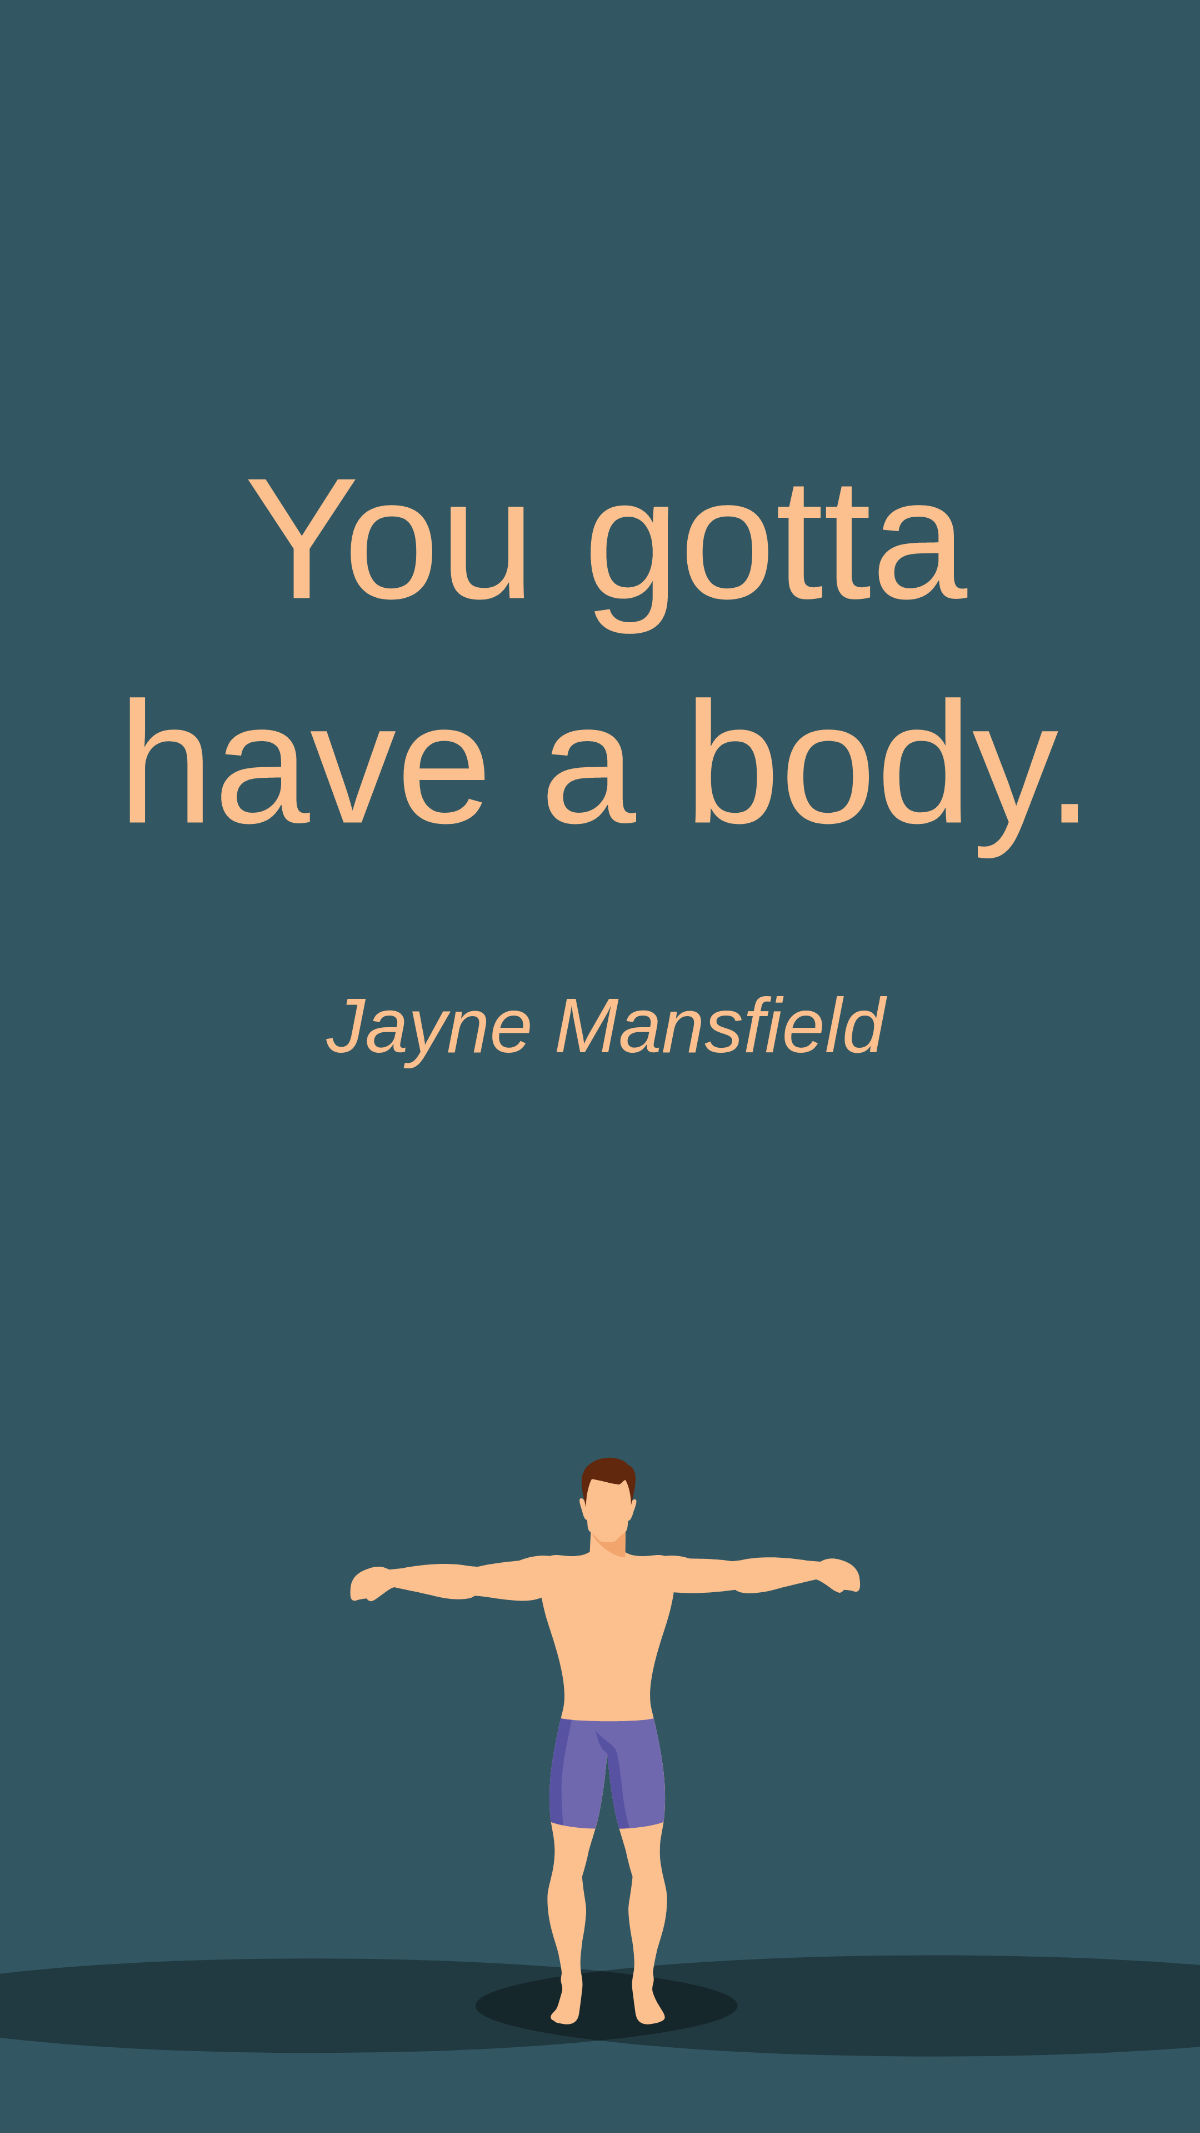 Jayne Mansfield - You gotta have a body. Template